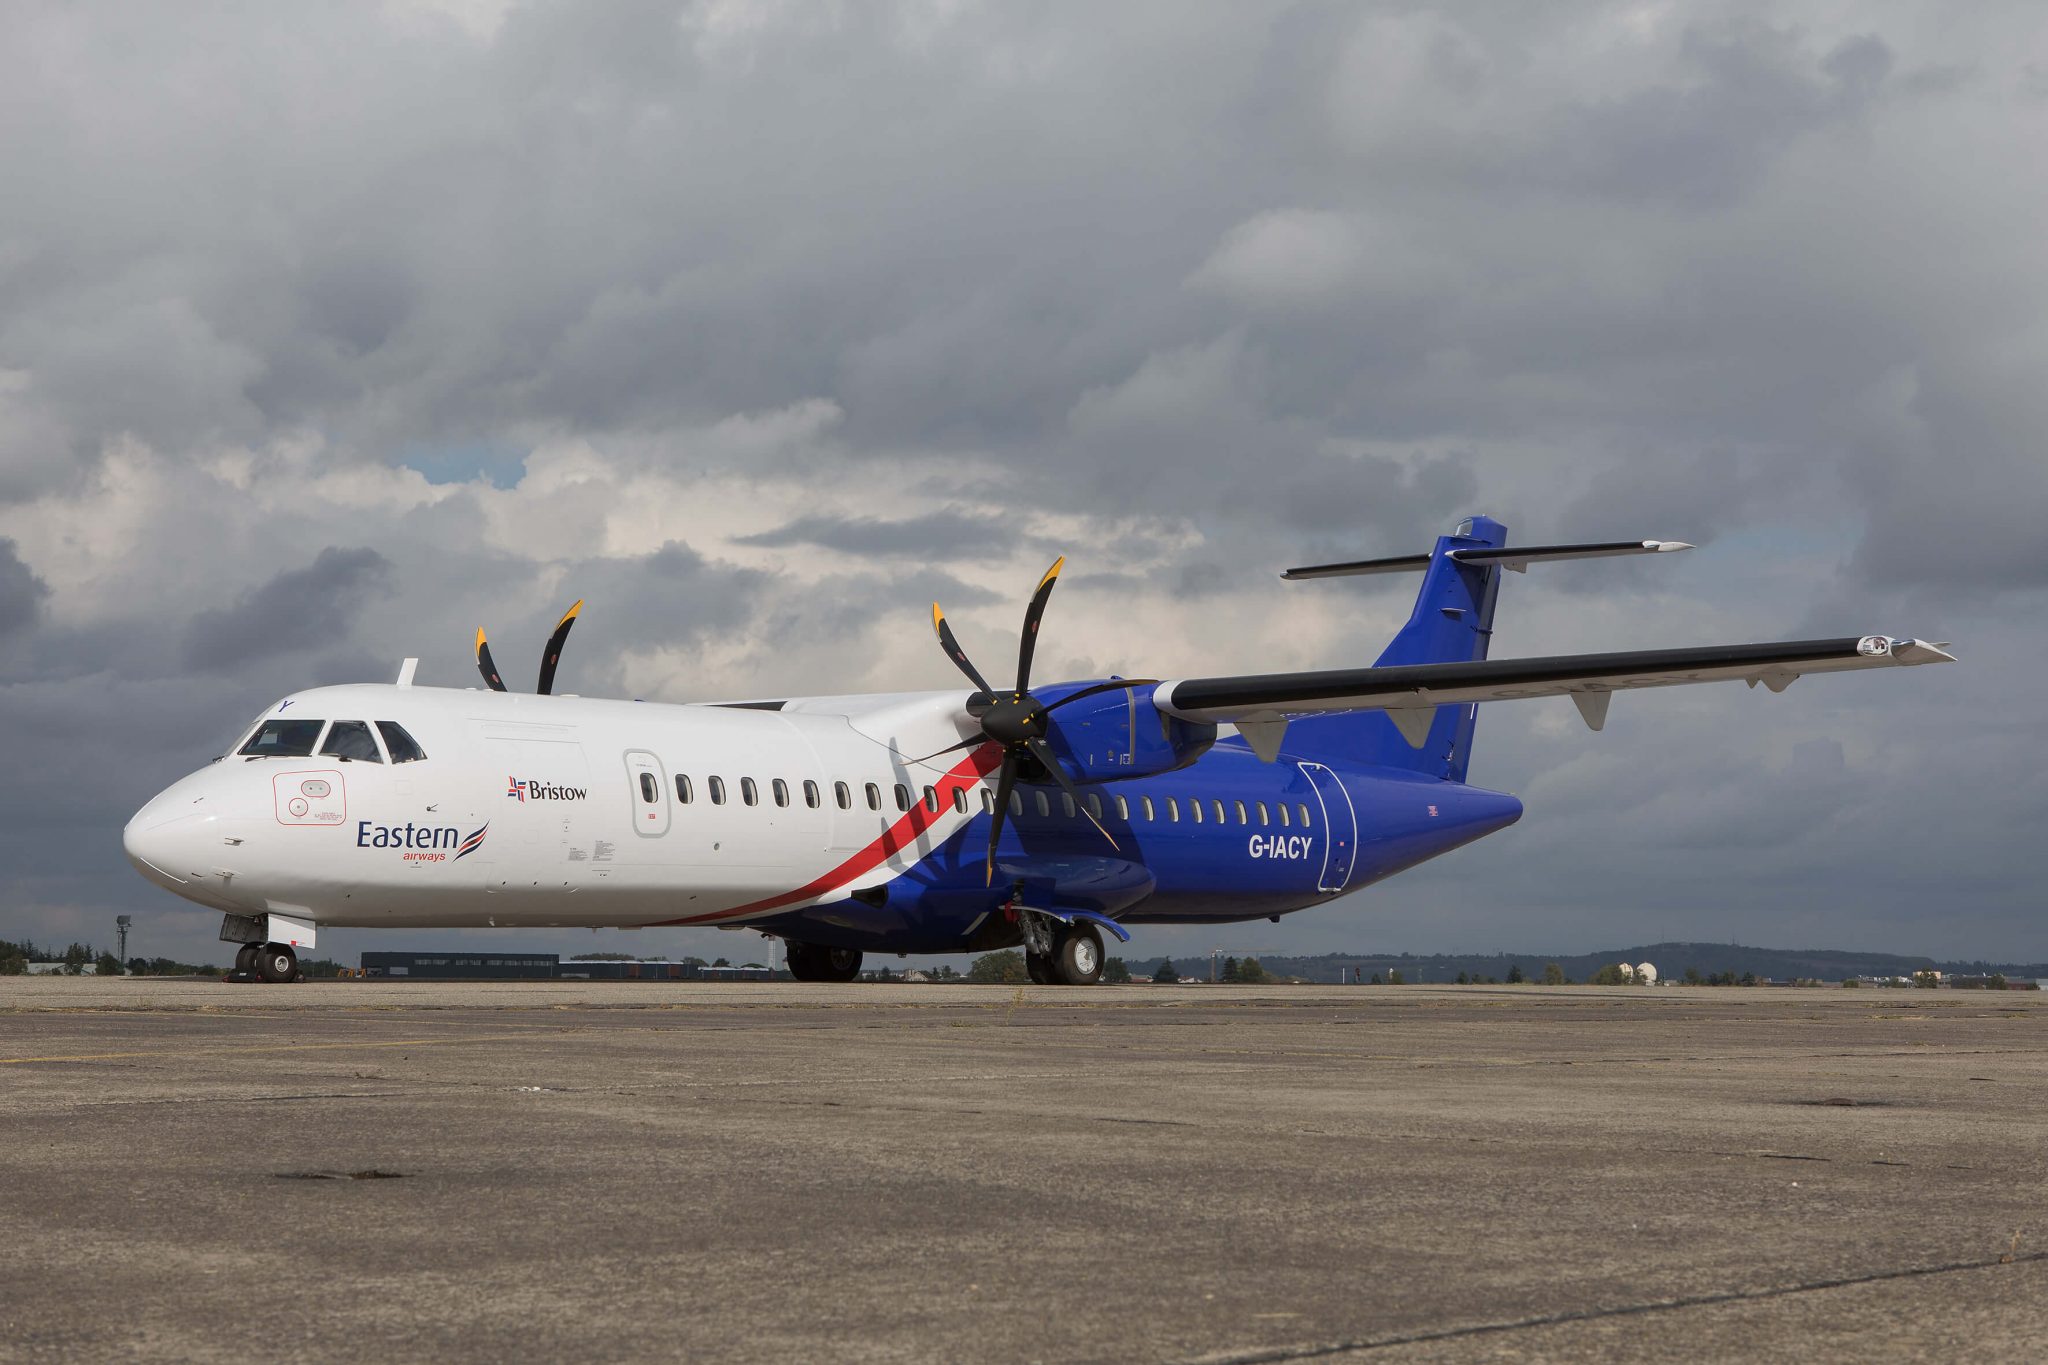 NAC delivers one ATR 72-600, MSN 1482, to Eastern Airways on lease